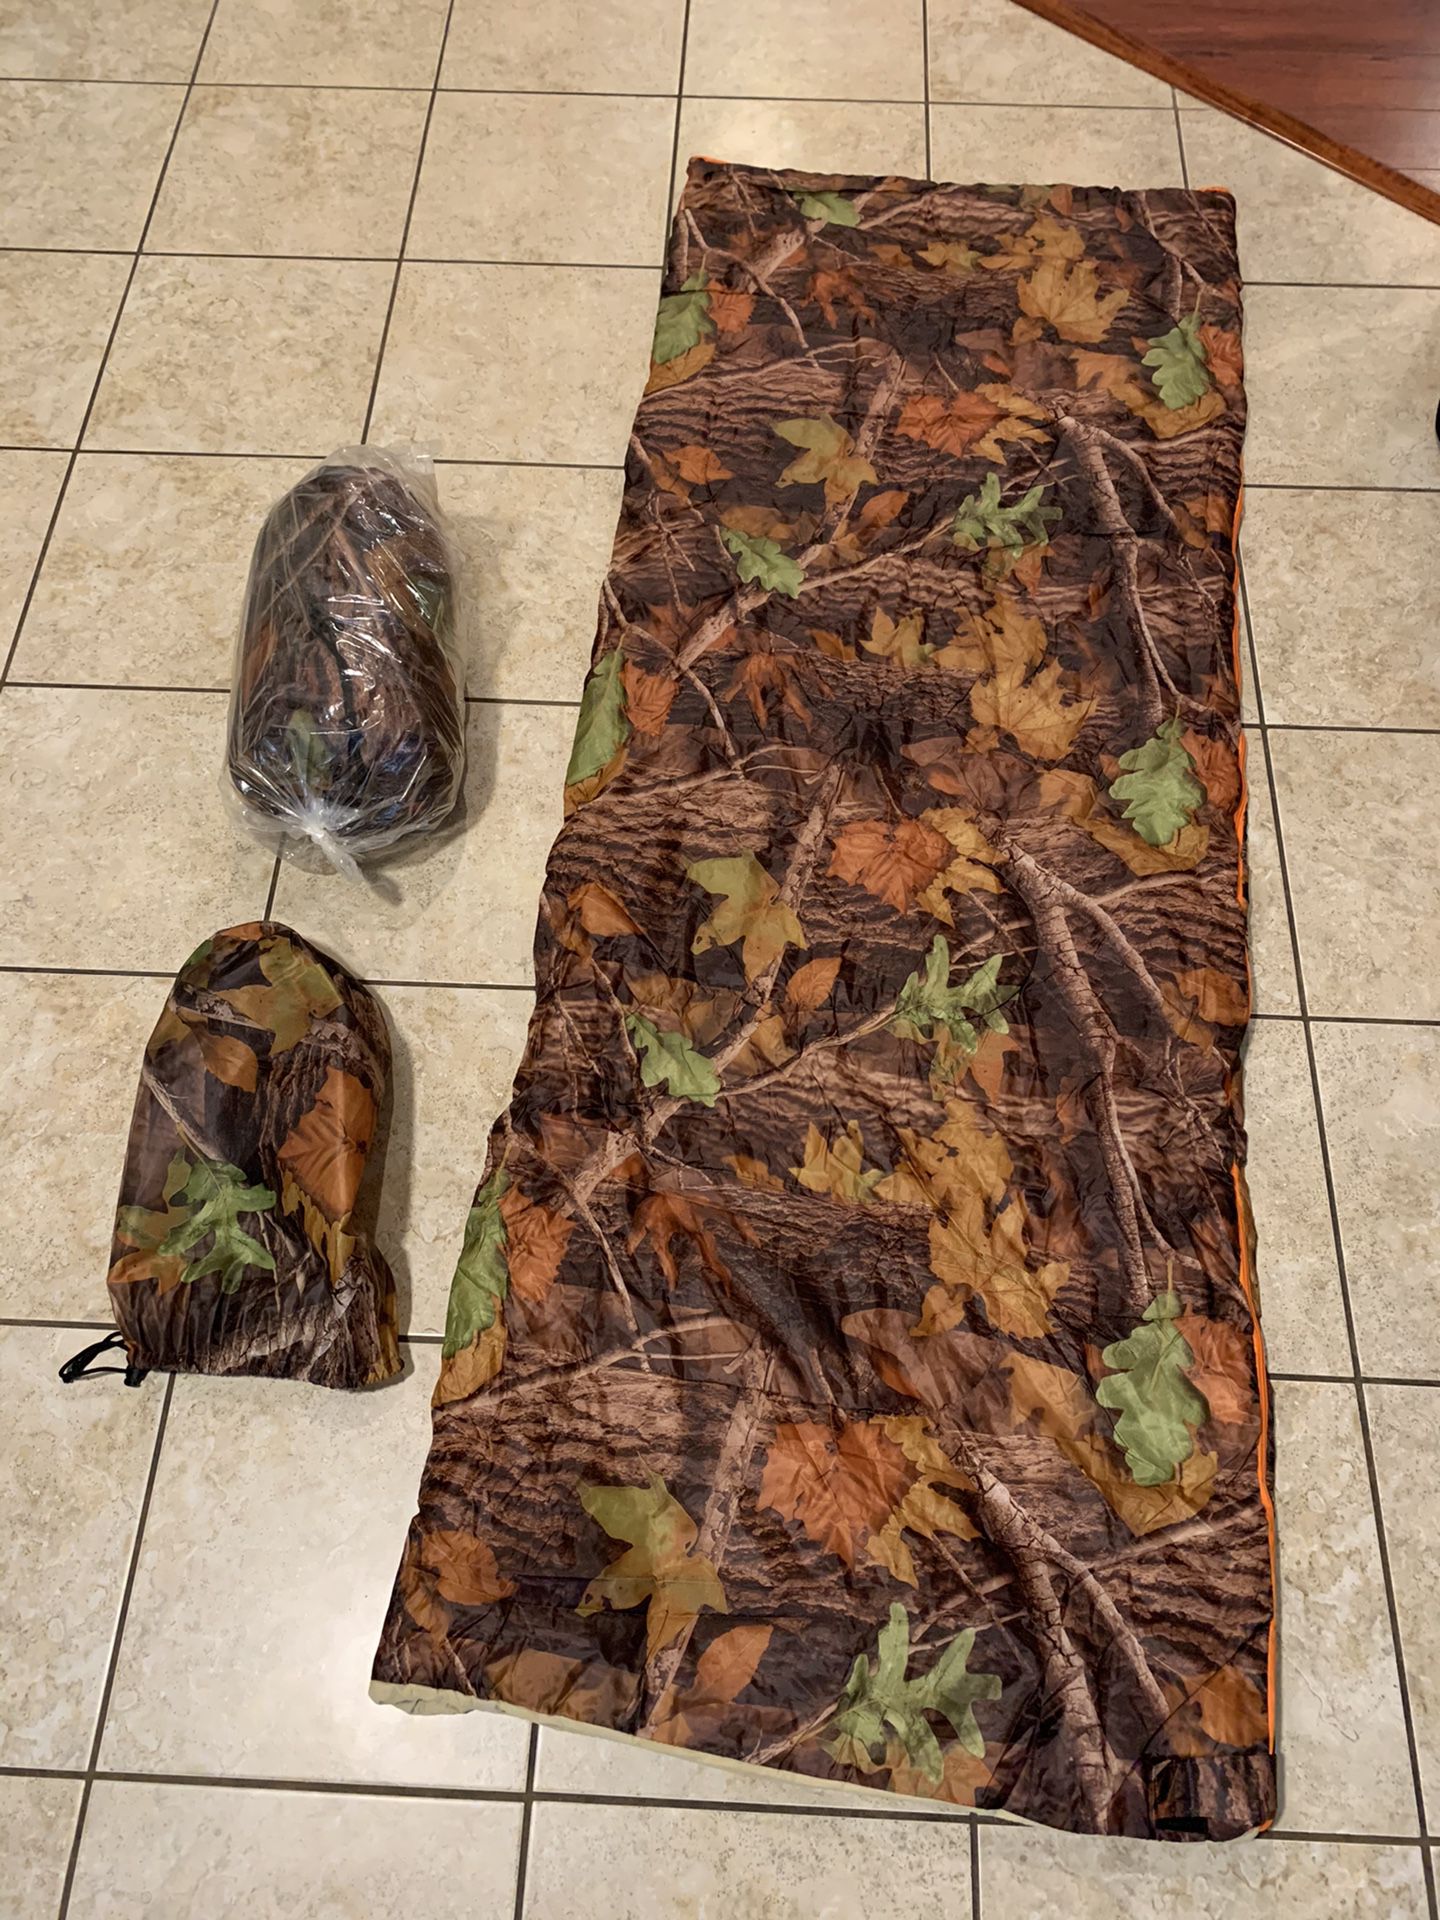 New Camouflage Sleeping bags qty 2